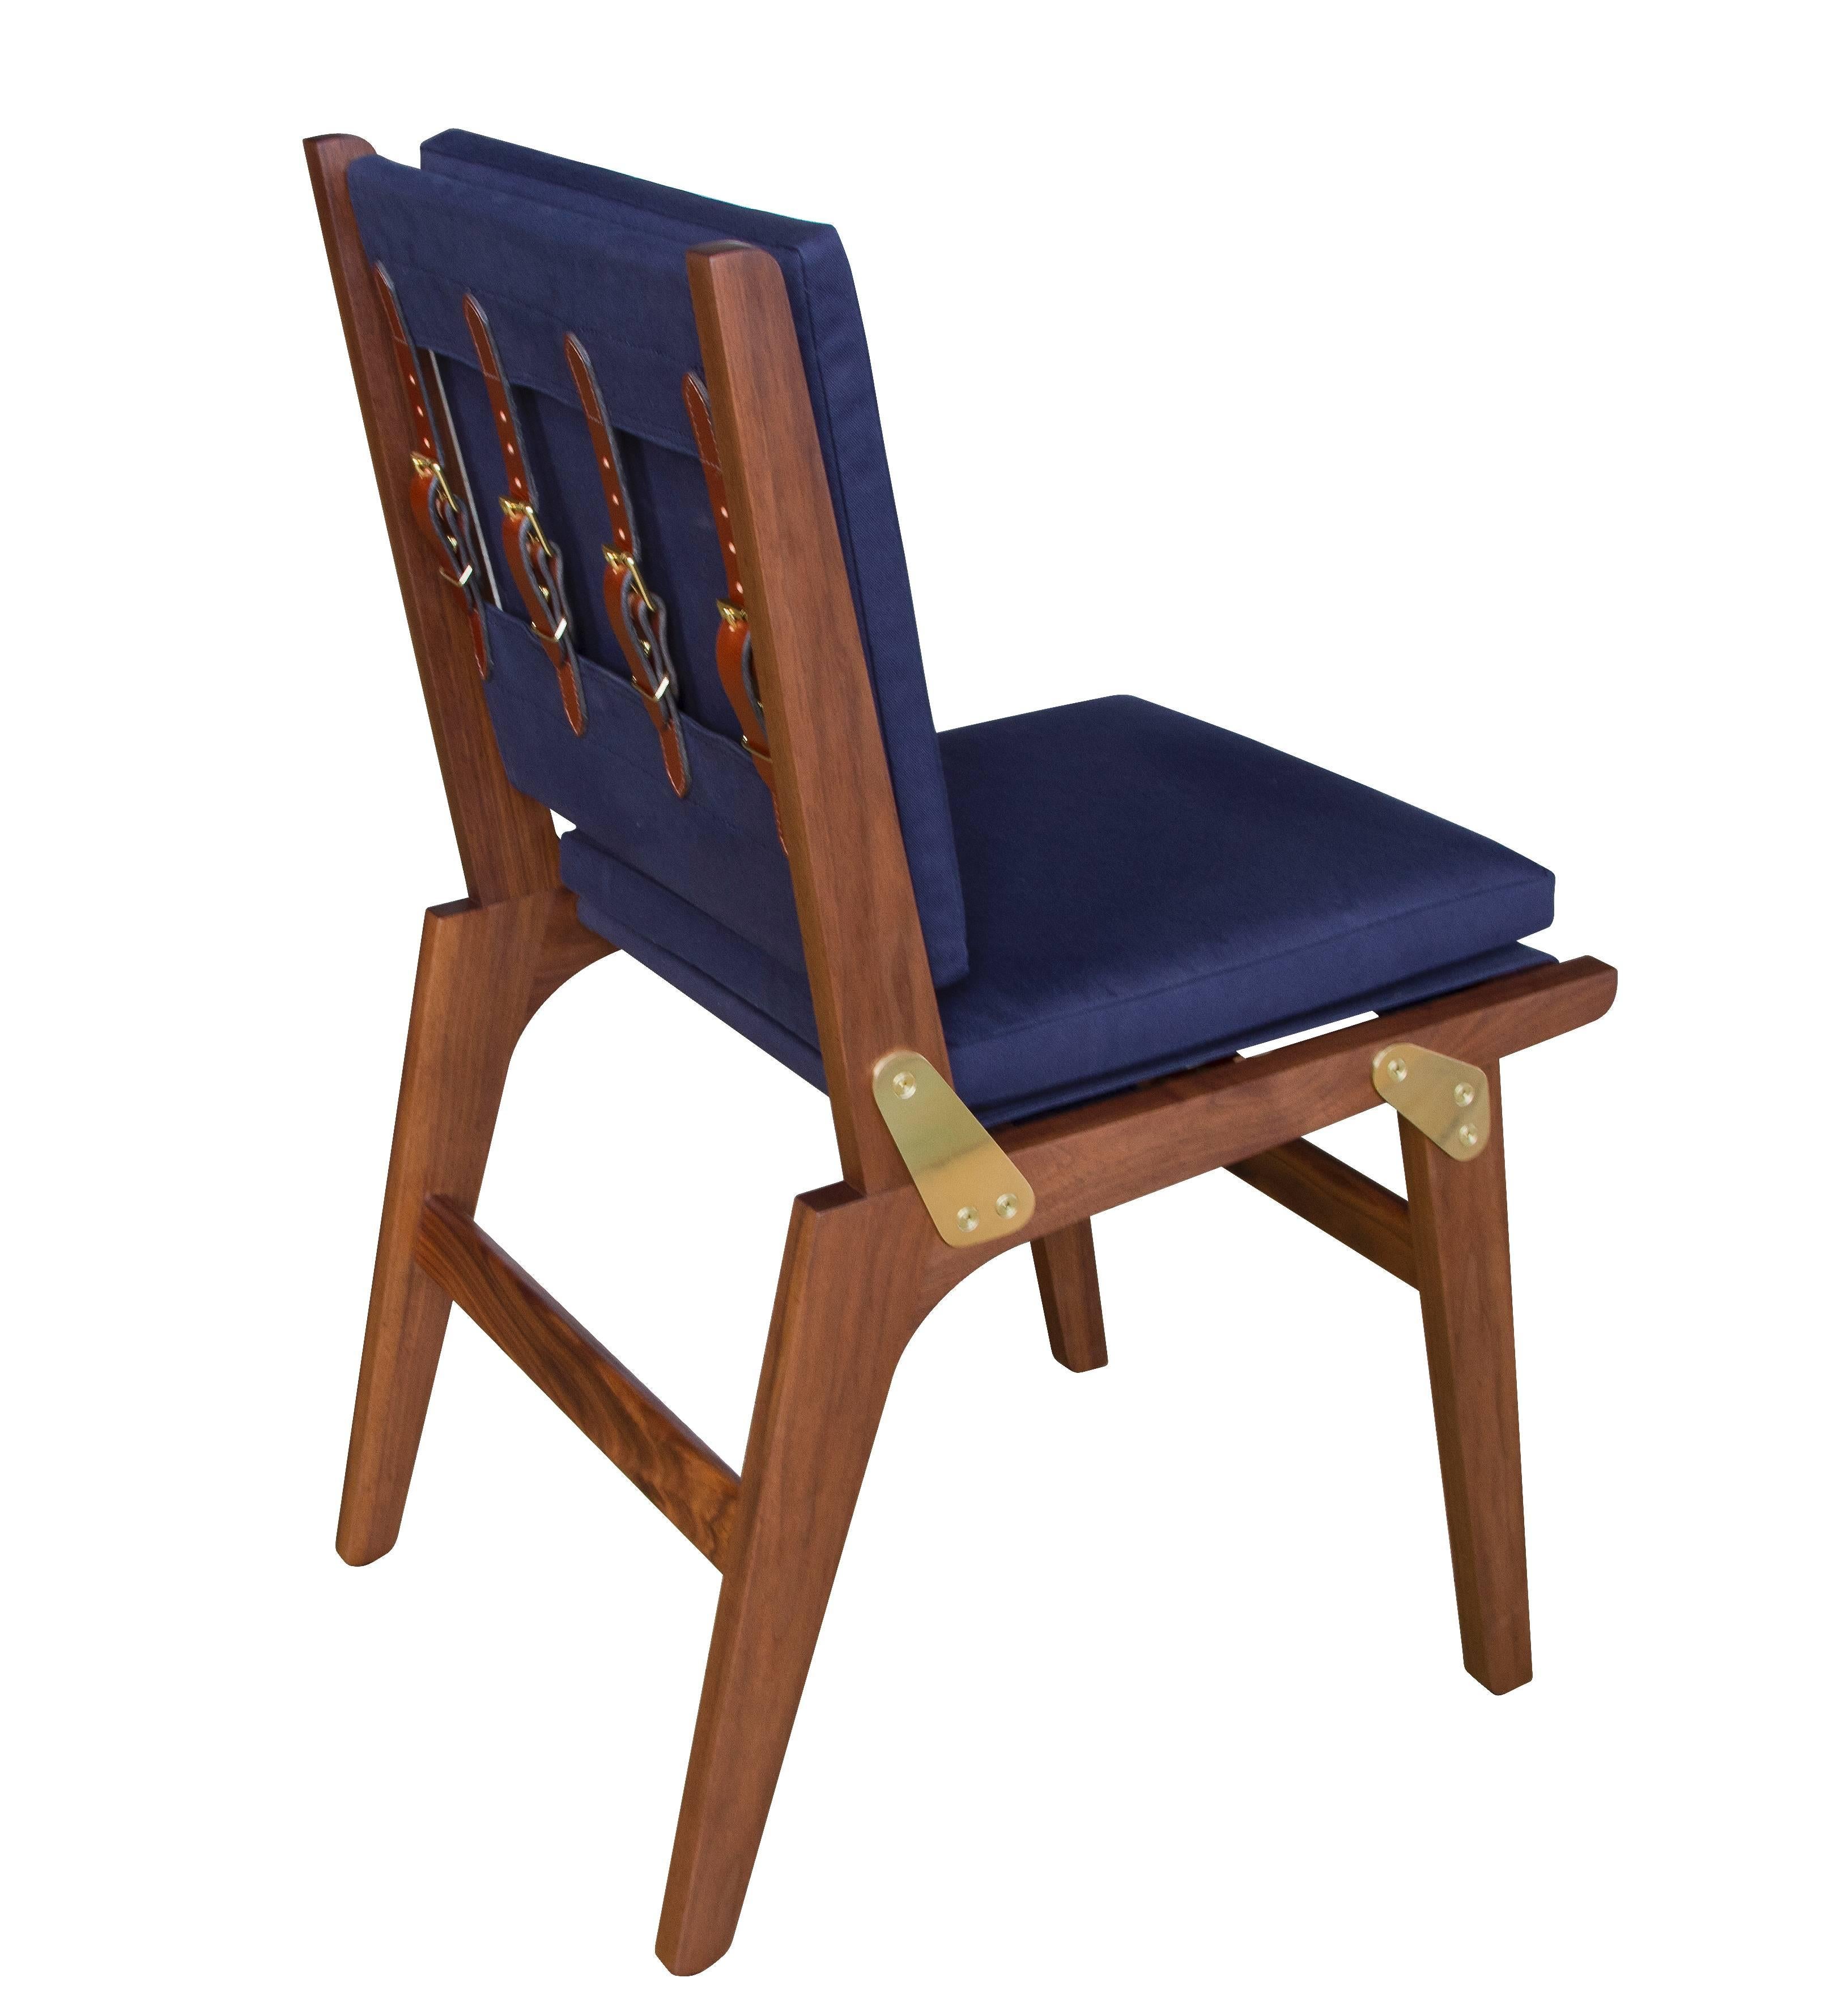 The Officer's Field Set dining chair in oiled walnut with navy canvas upholstery, saddle English bridle leather strapping and natural brushed brass buckles and hardware. Shown as the non-folding version. Available as a folding chair for an upcharge